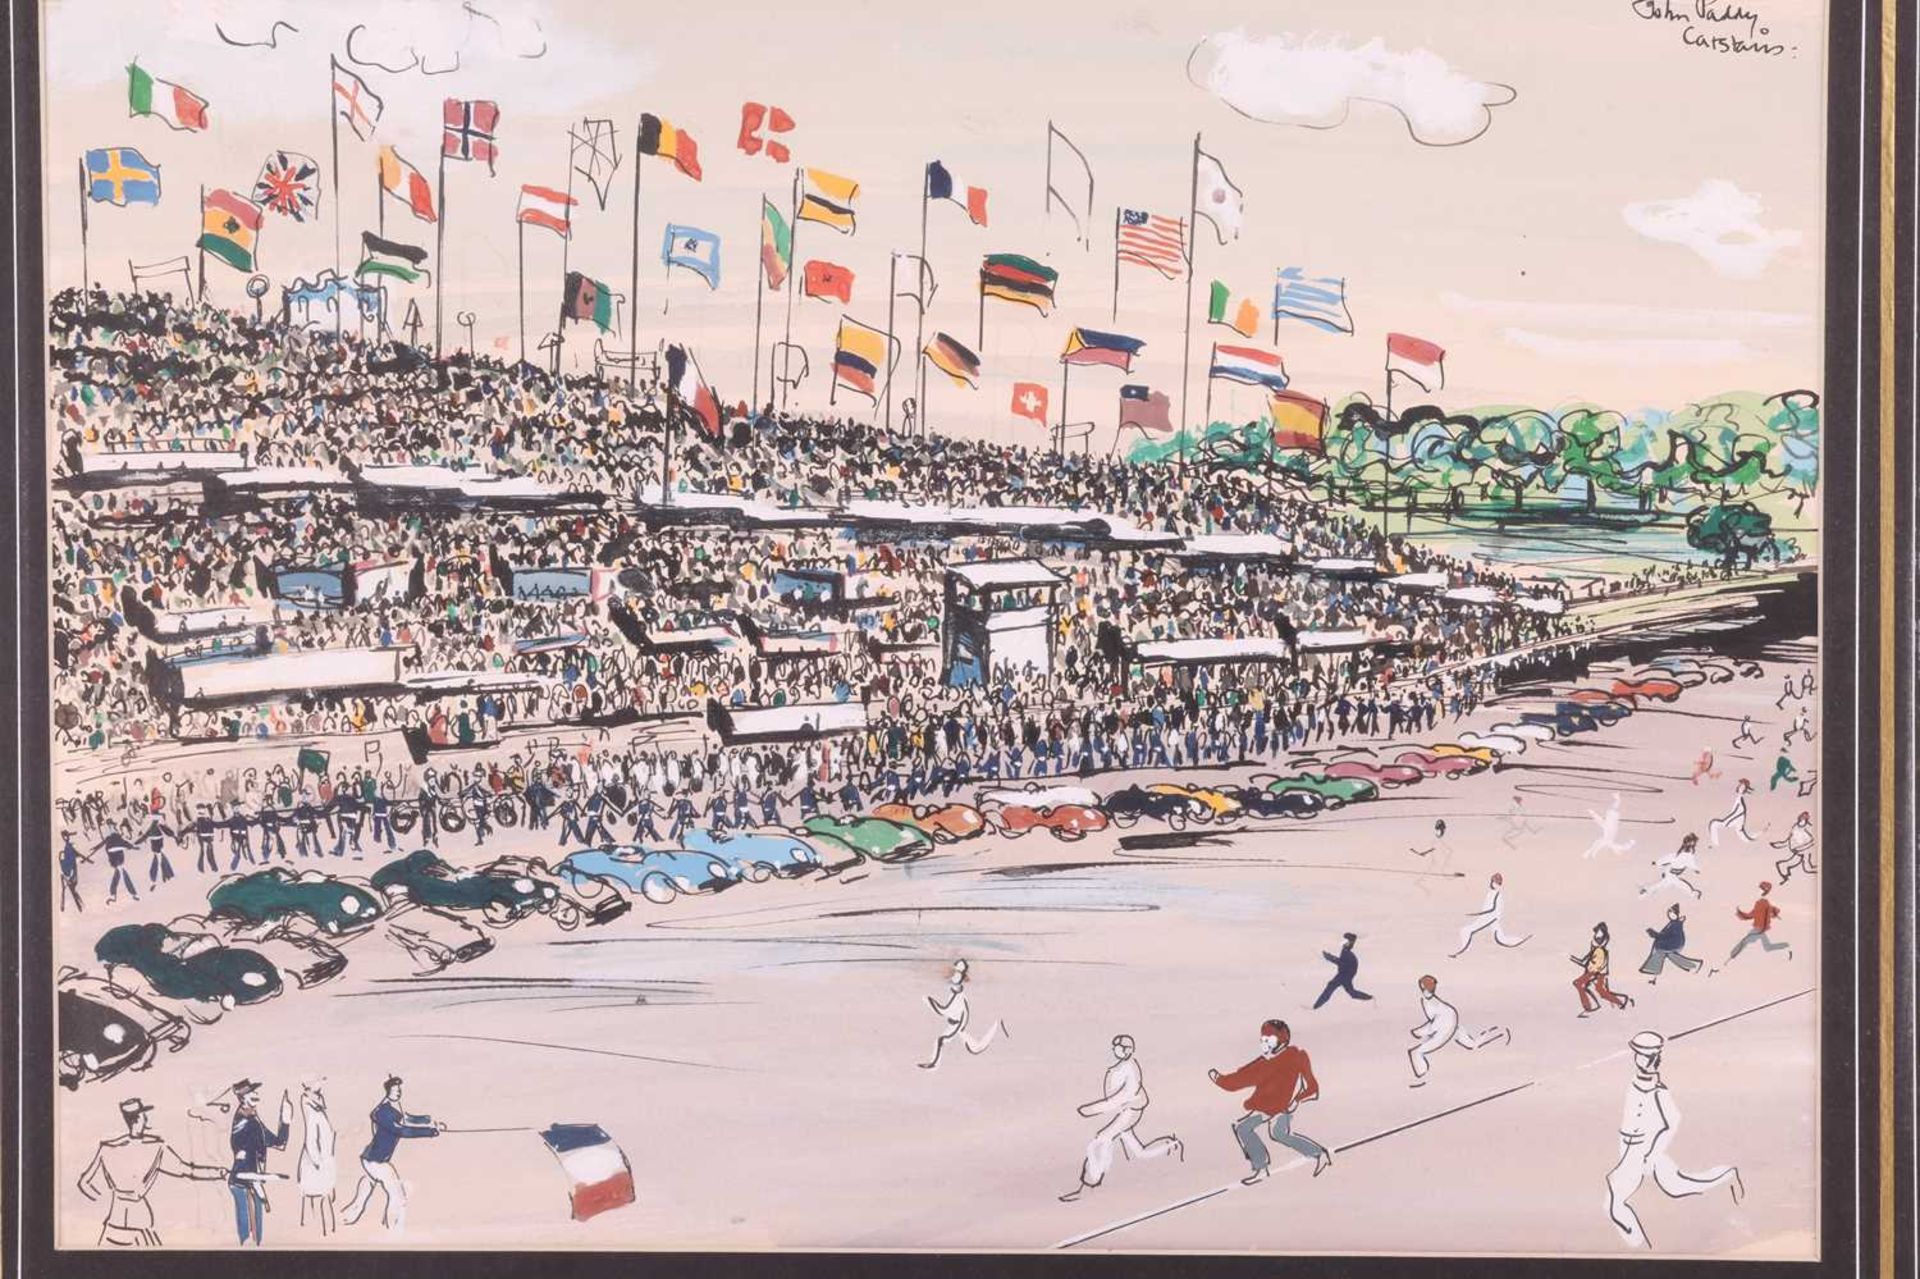 John Paddy Carstairs (1916 - 1970), 'Le Mans - The Start of the Race', signed 'John Paddy Carstairs' - Image 10 of 10